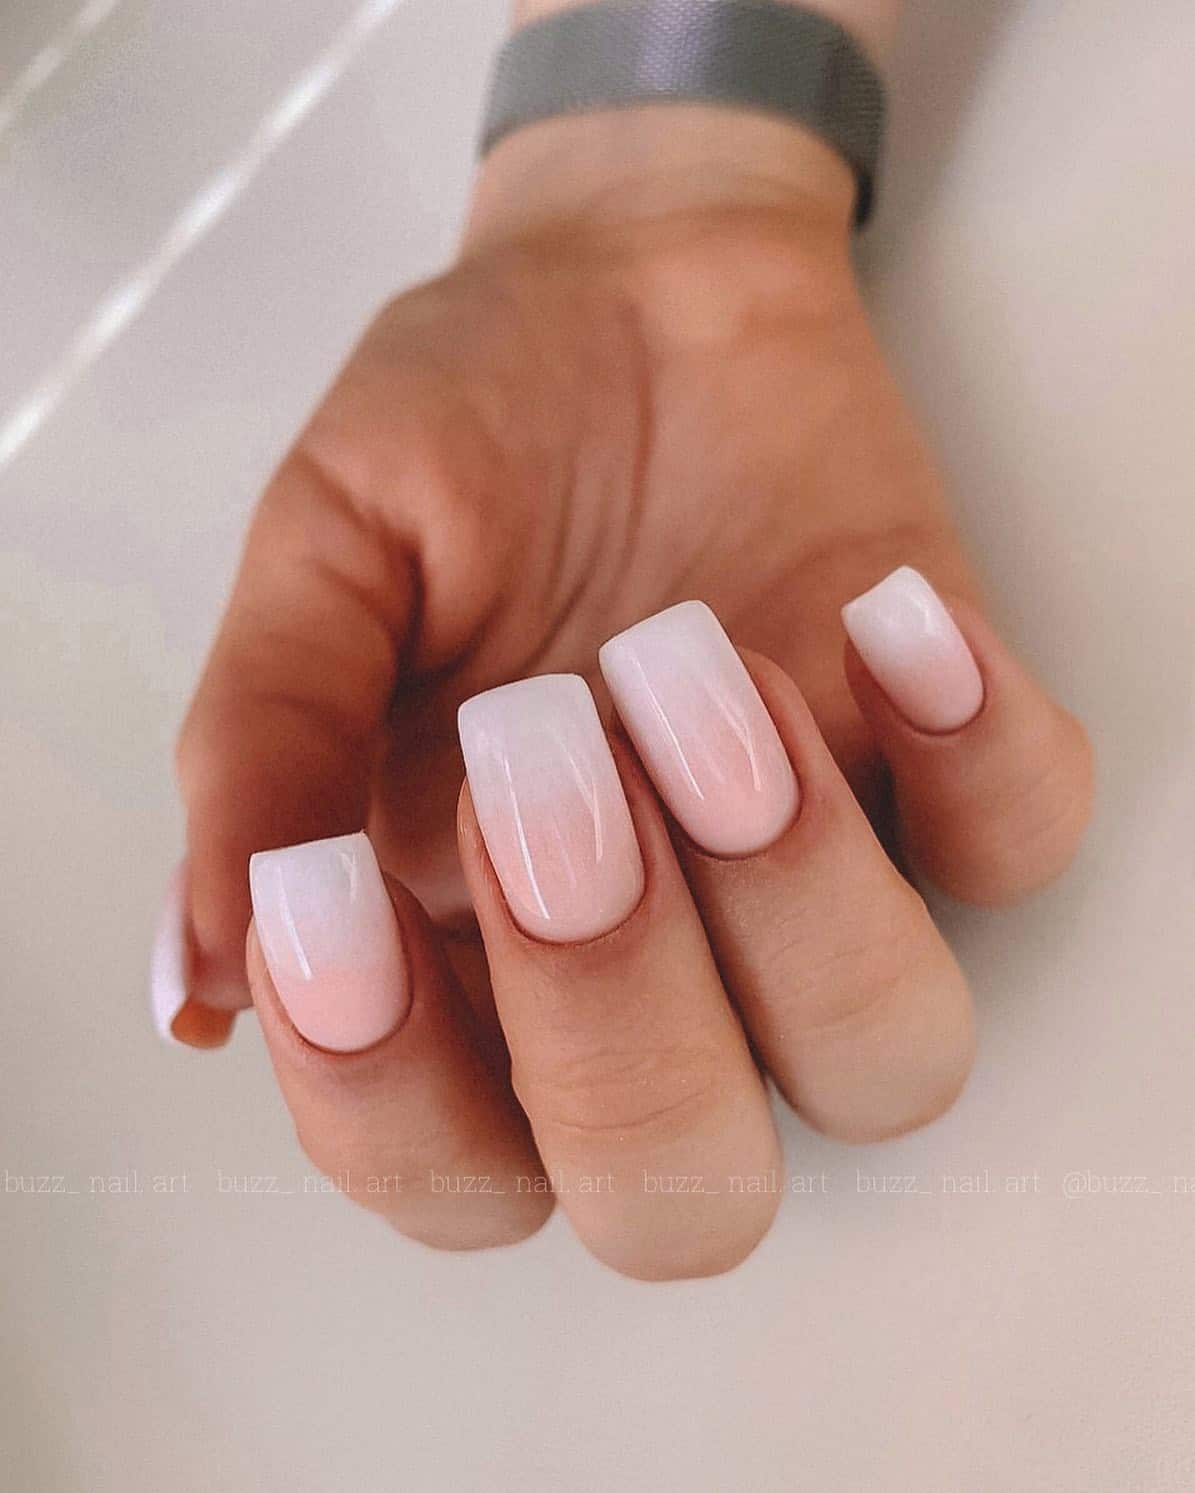 A hand with medium square nails painted a white and pink ombre